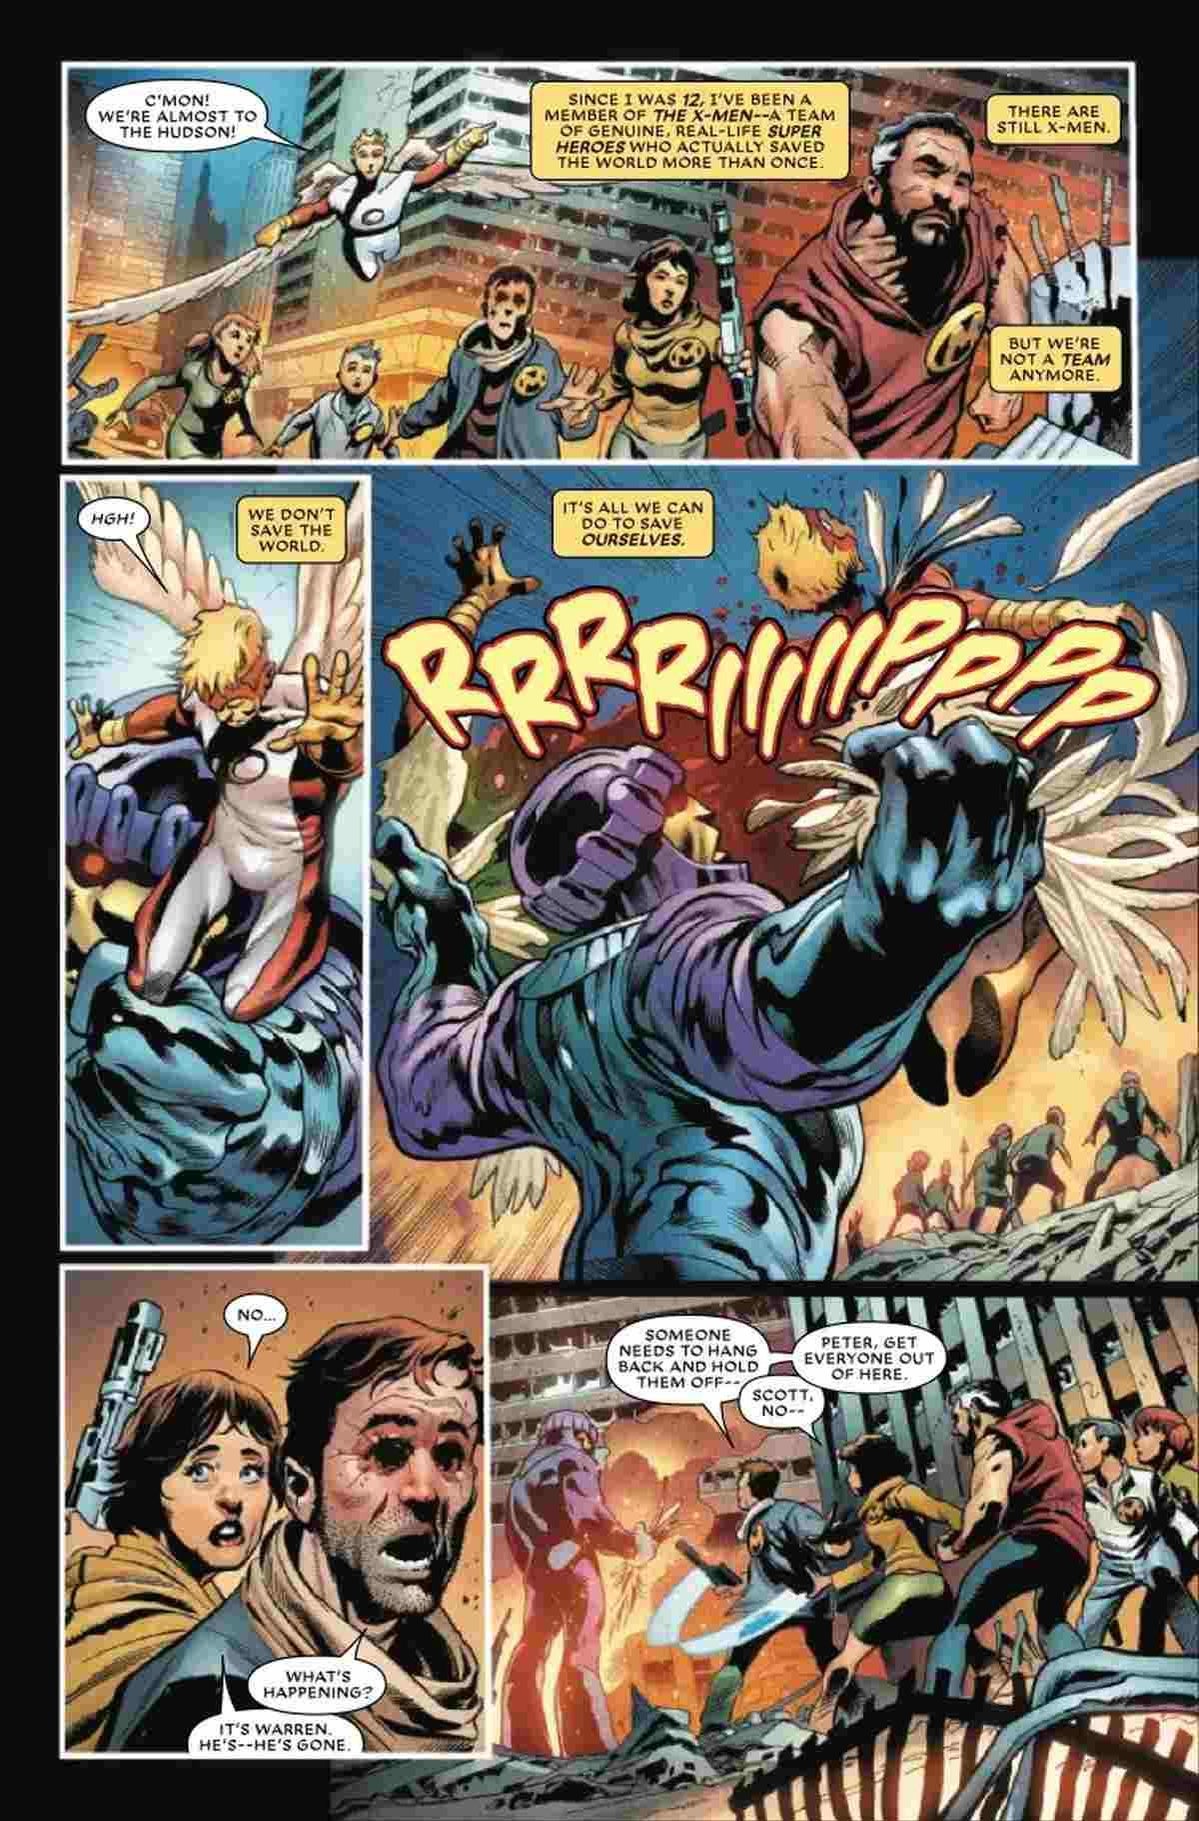 x-men-days-of-future-past-doomsday-1-preview-page-2.jpg